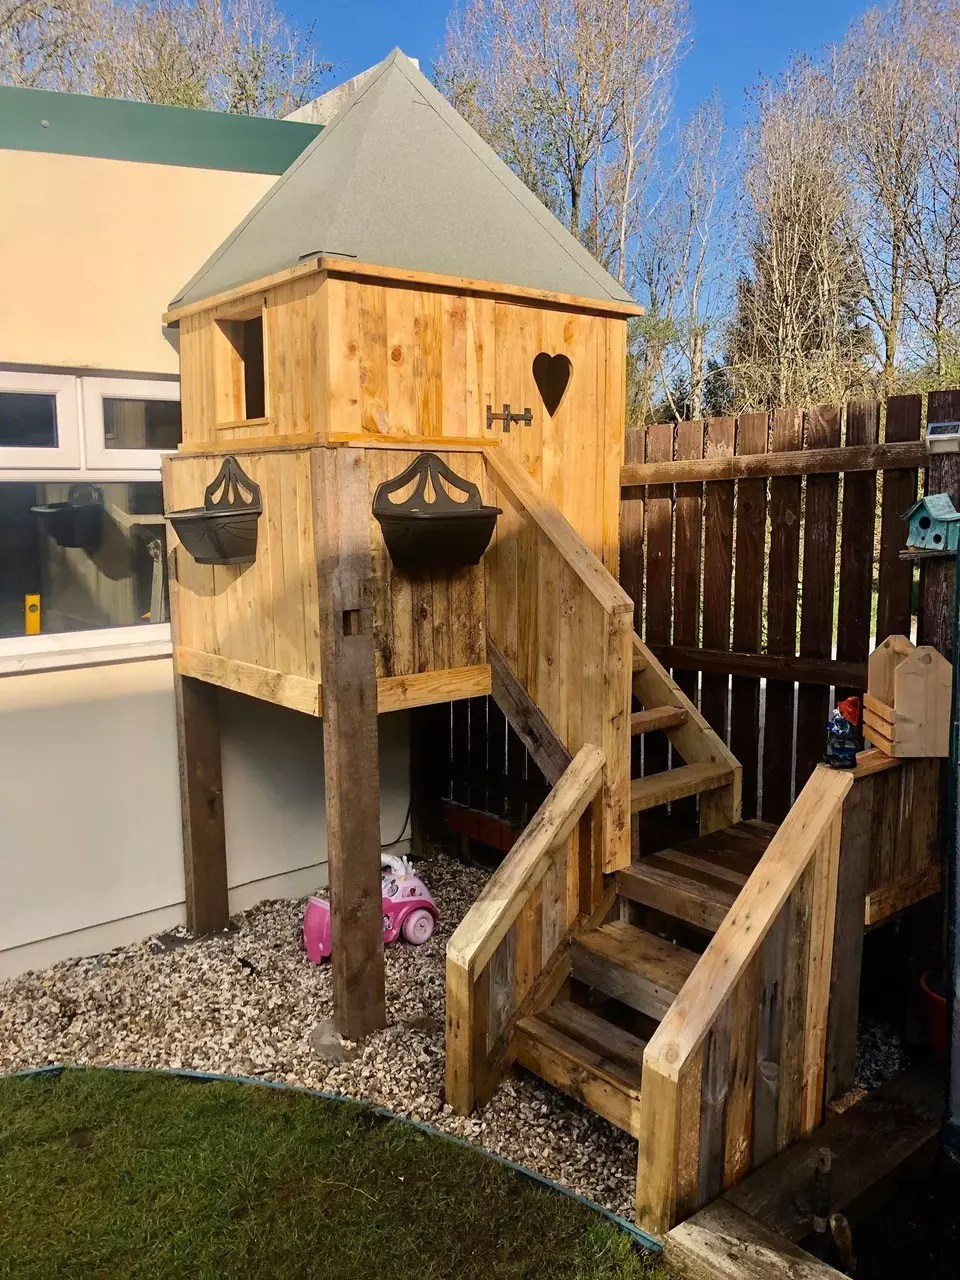 Tom spent just £10 building the impressive treehouse for his daughter.